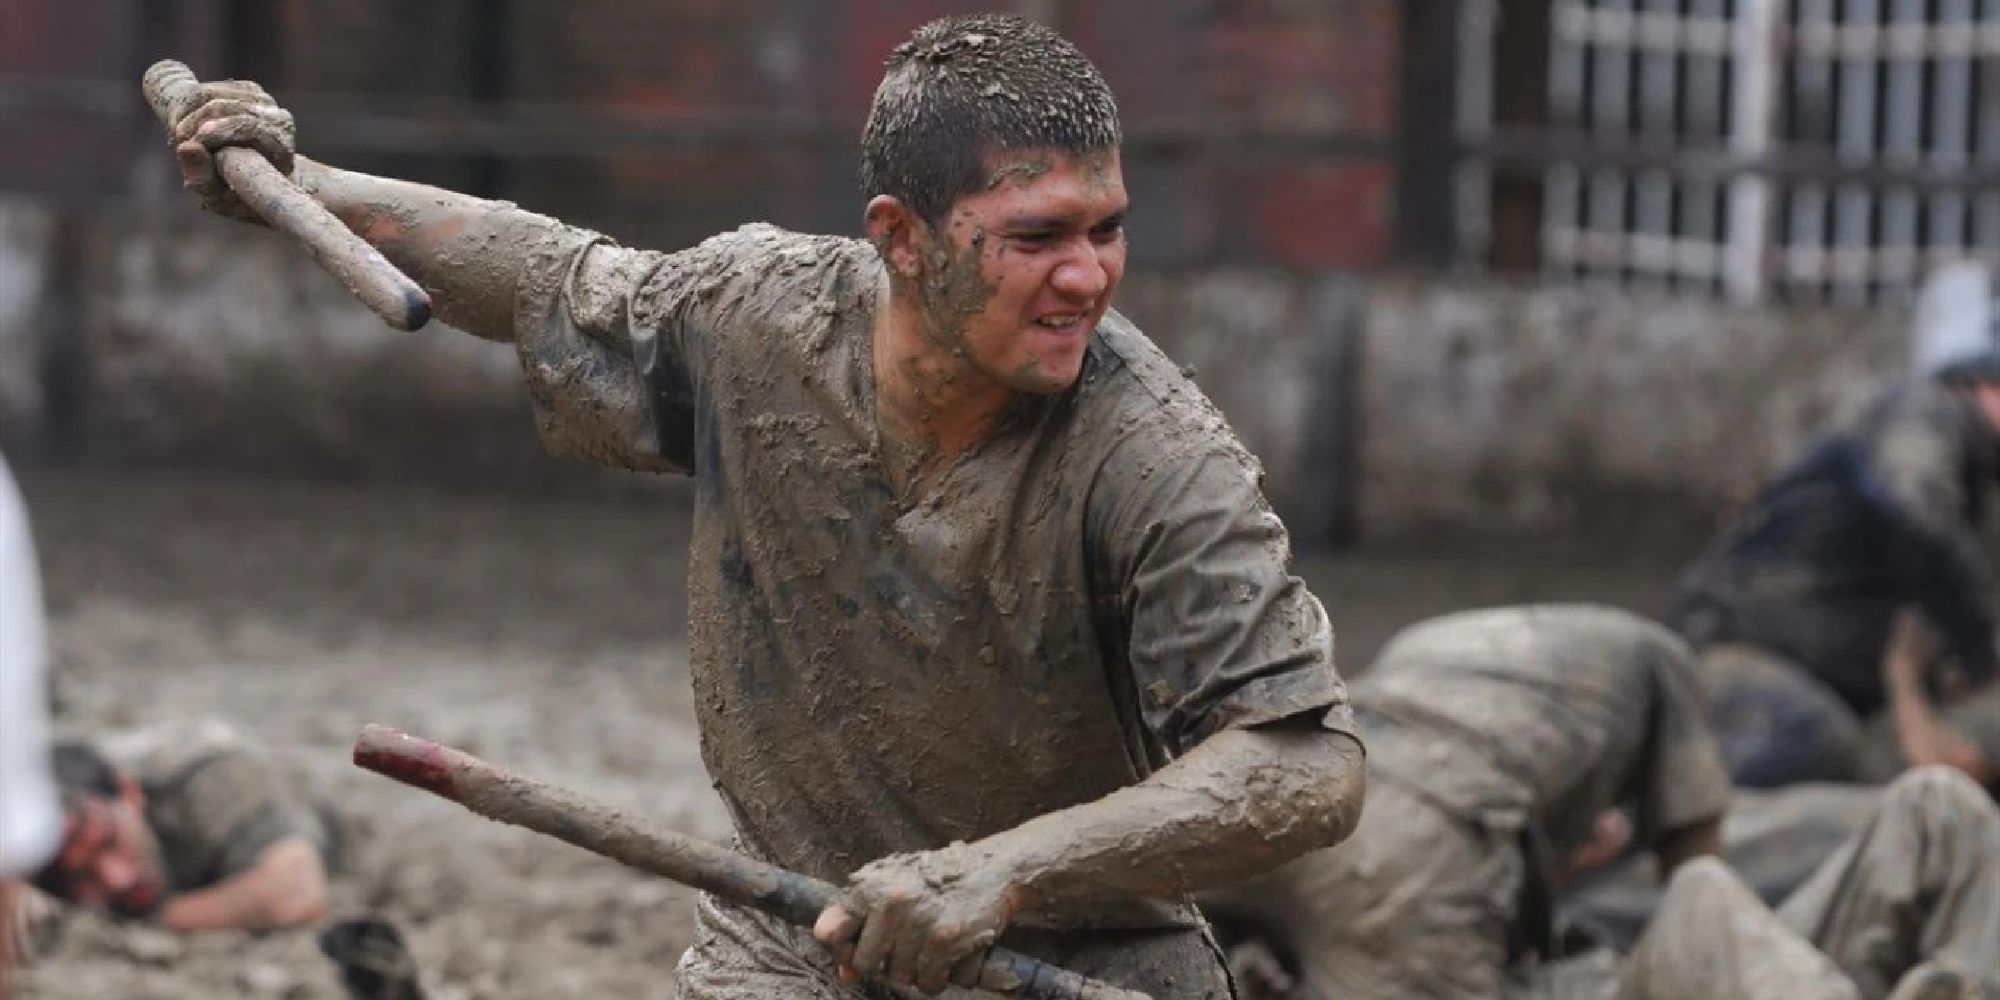 A young man wielding two sticks while covered in mud in The Raid 2.